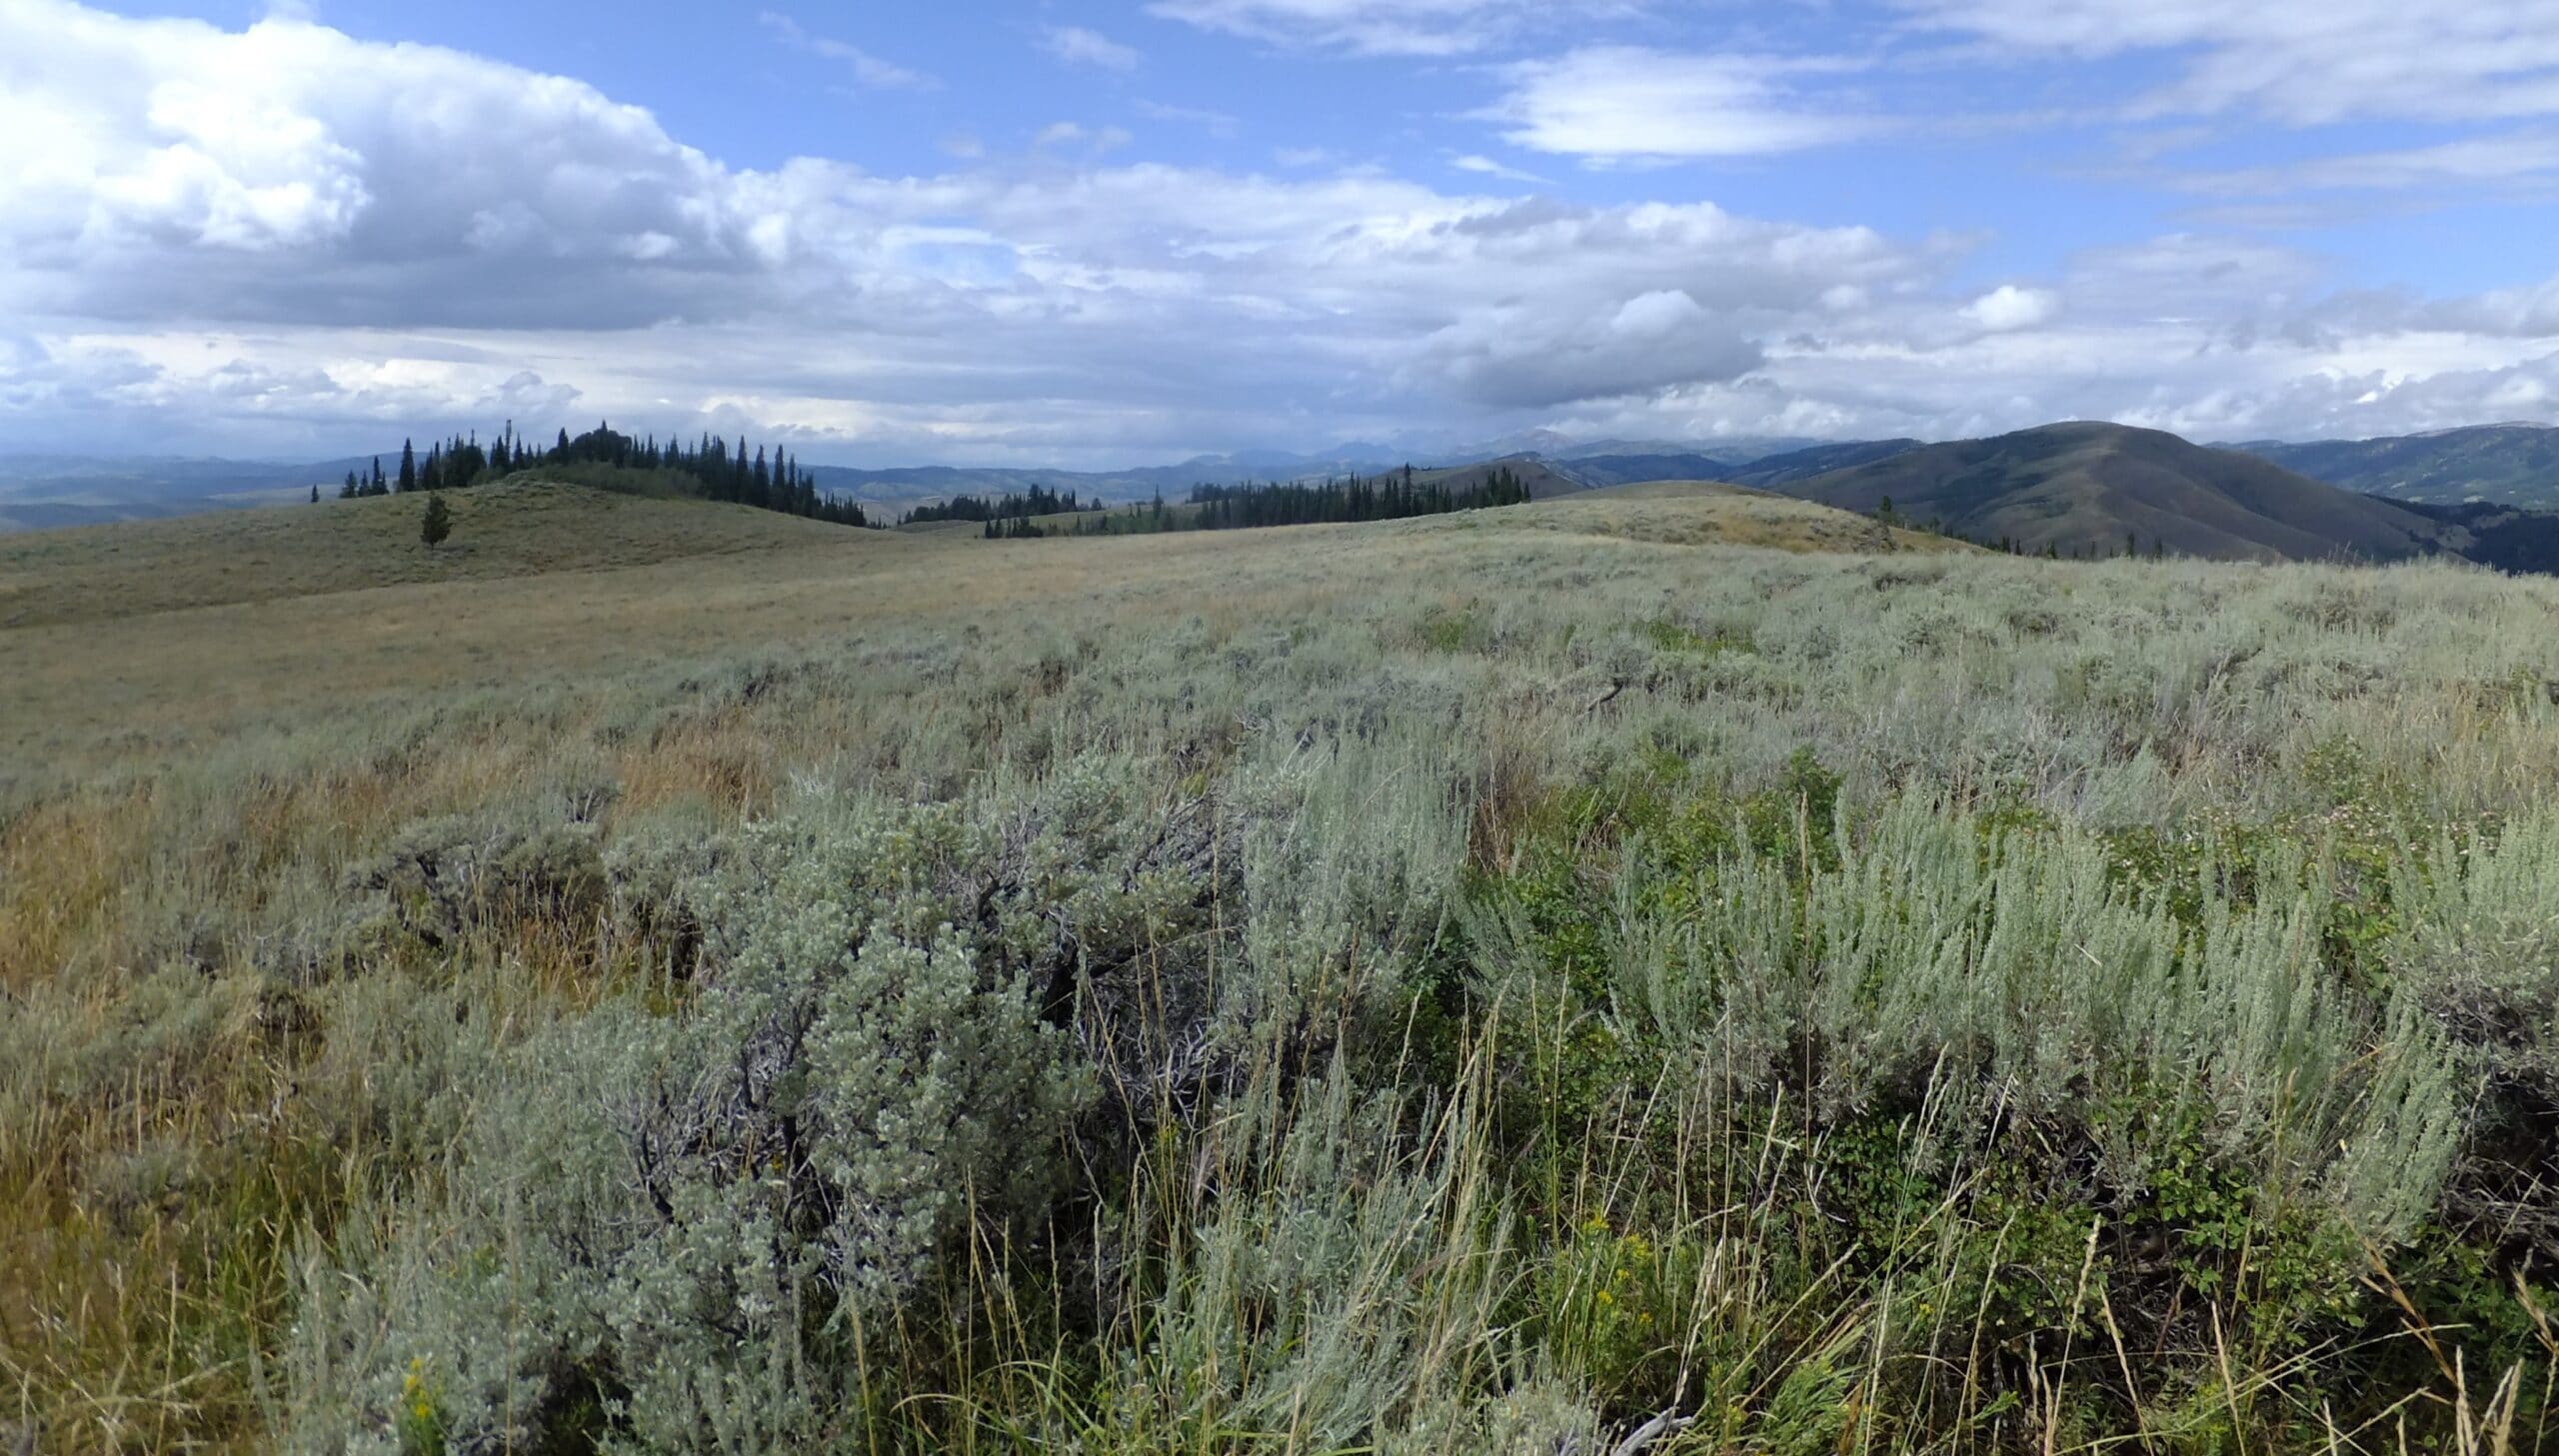 Vast, open spaces in the Wyoming Range. The dense vegetation in the foreground is lush and green, indicating that it is mid-summer. The sky is blue with white, puffy clouds. There are no roads, trails, power lines, or any other signs of humans anywhere in the photo.